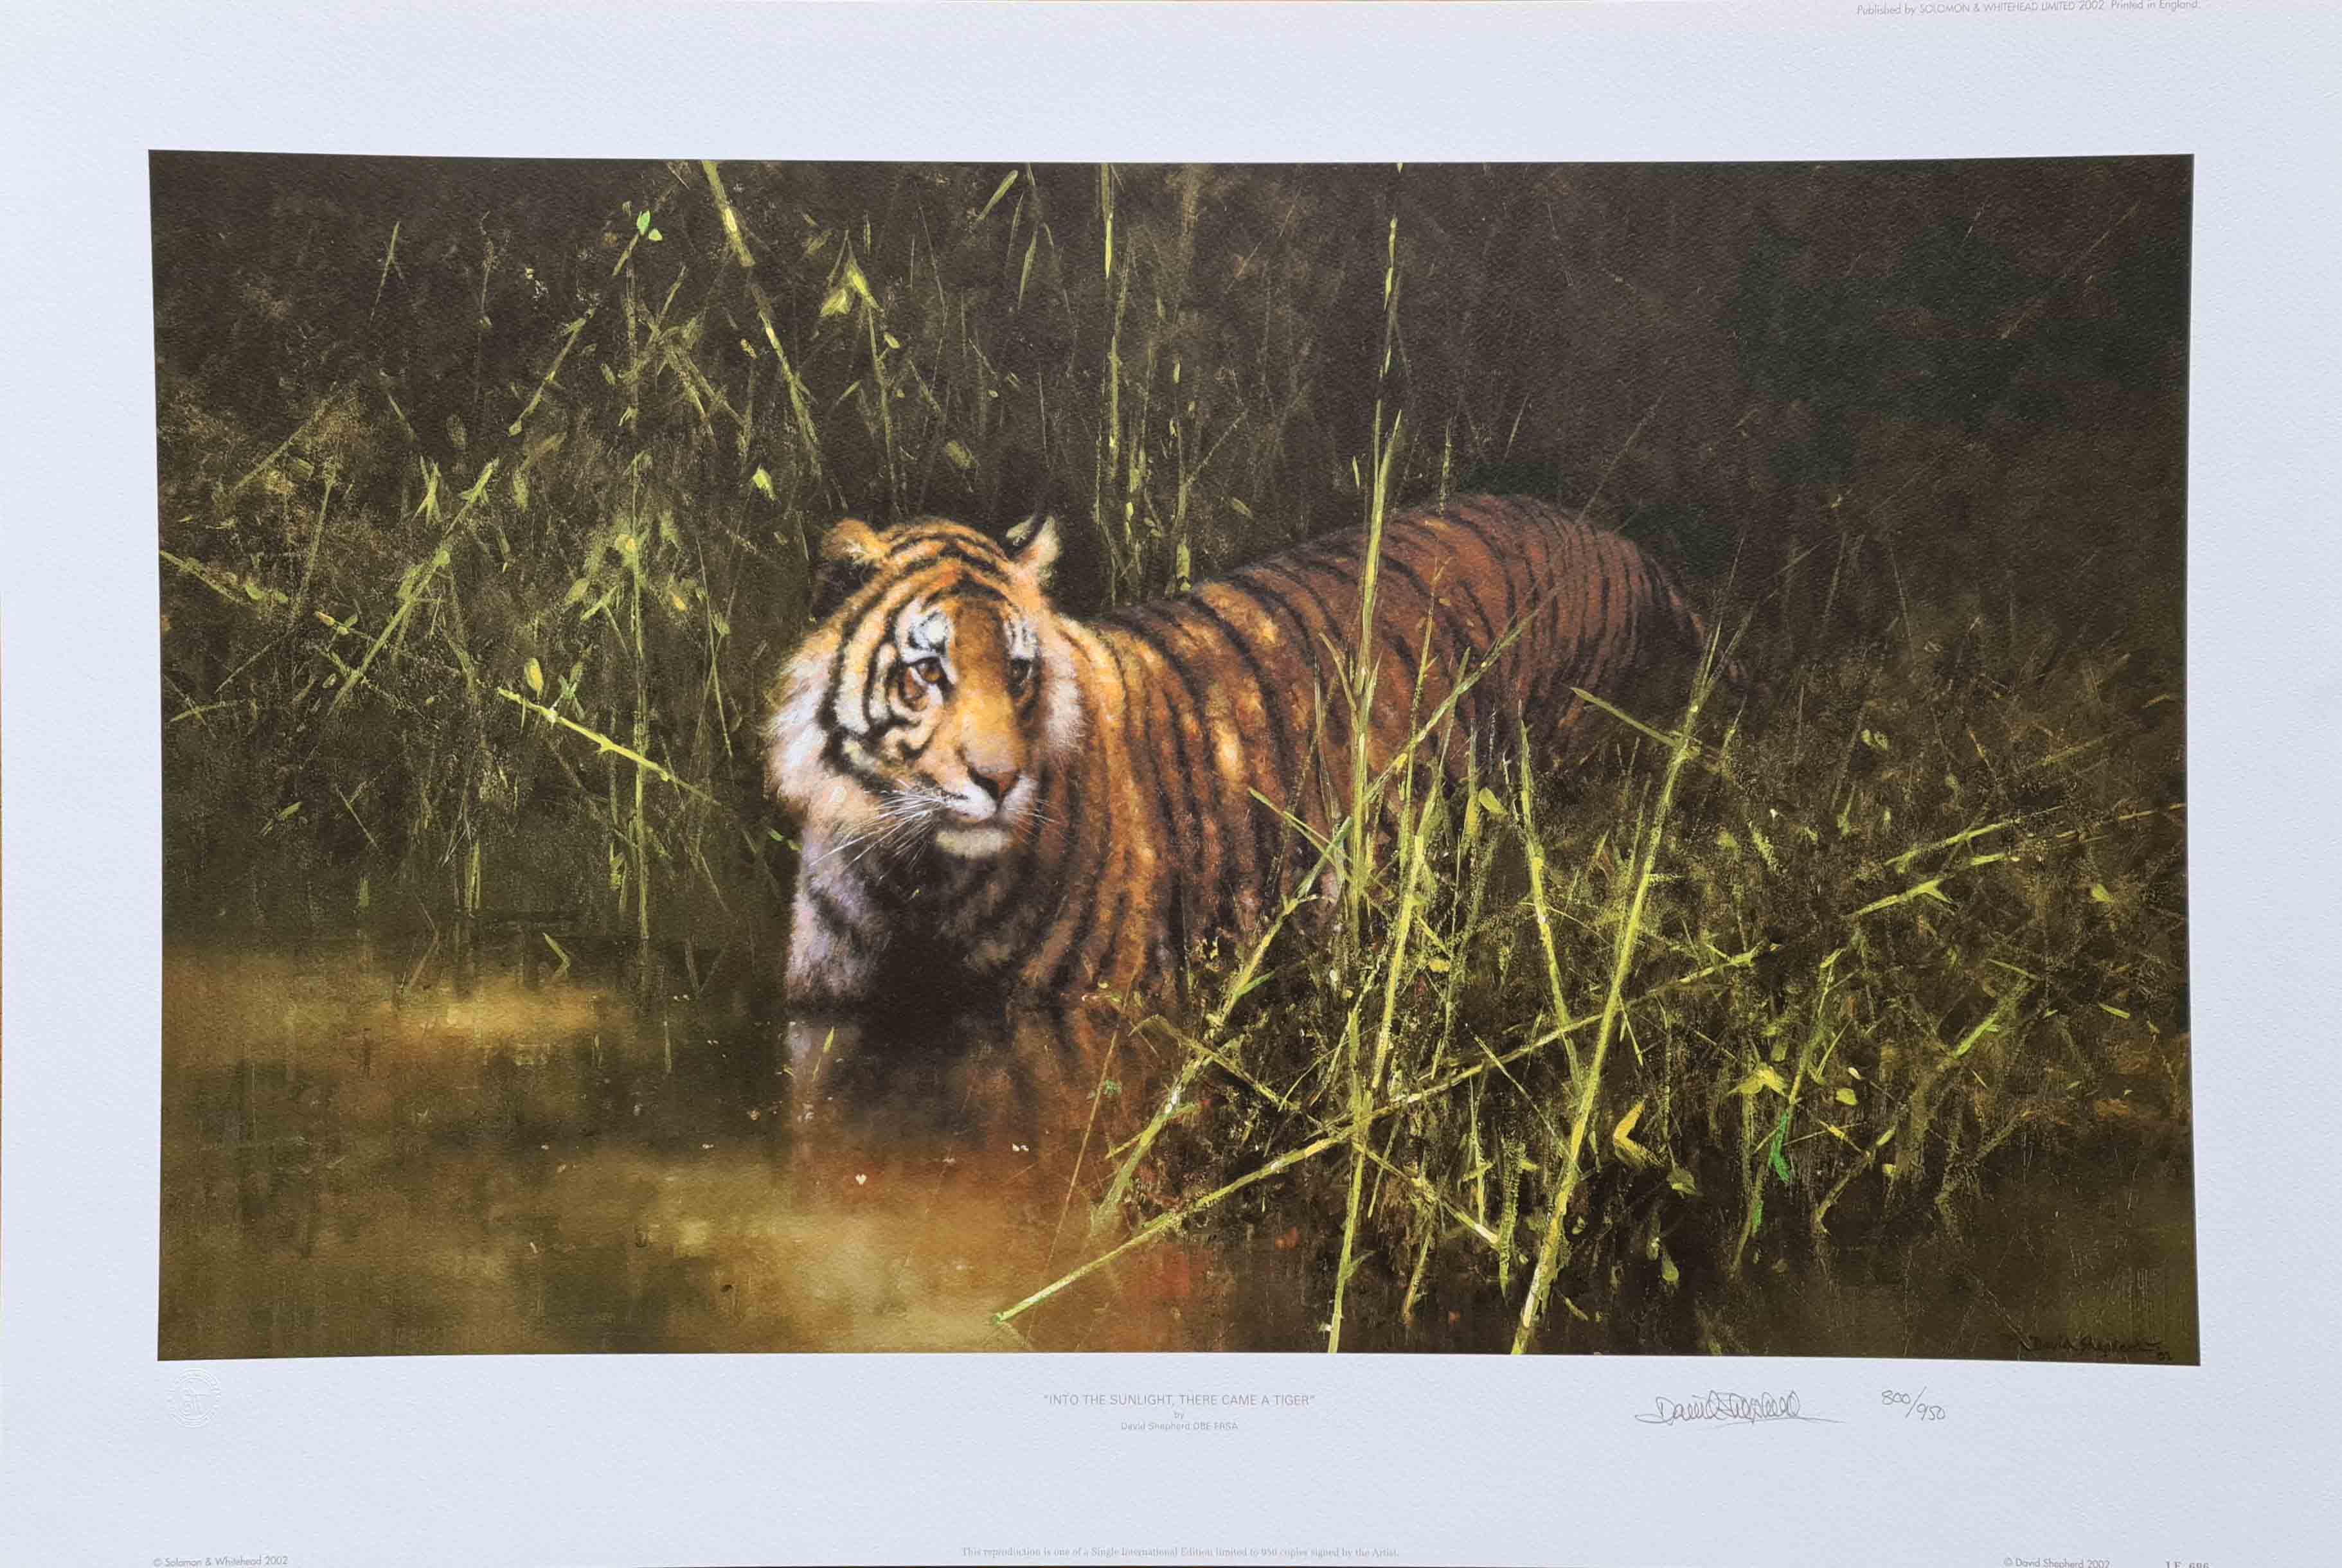 david shepherd, into the sunlight came a tiger, signed limited edition print